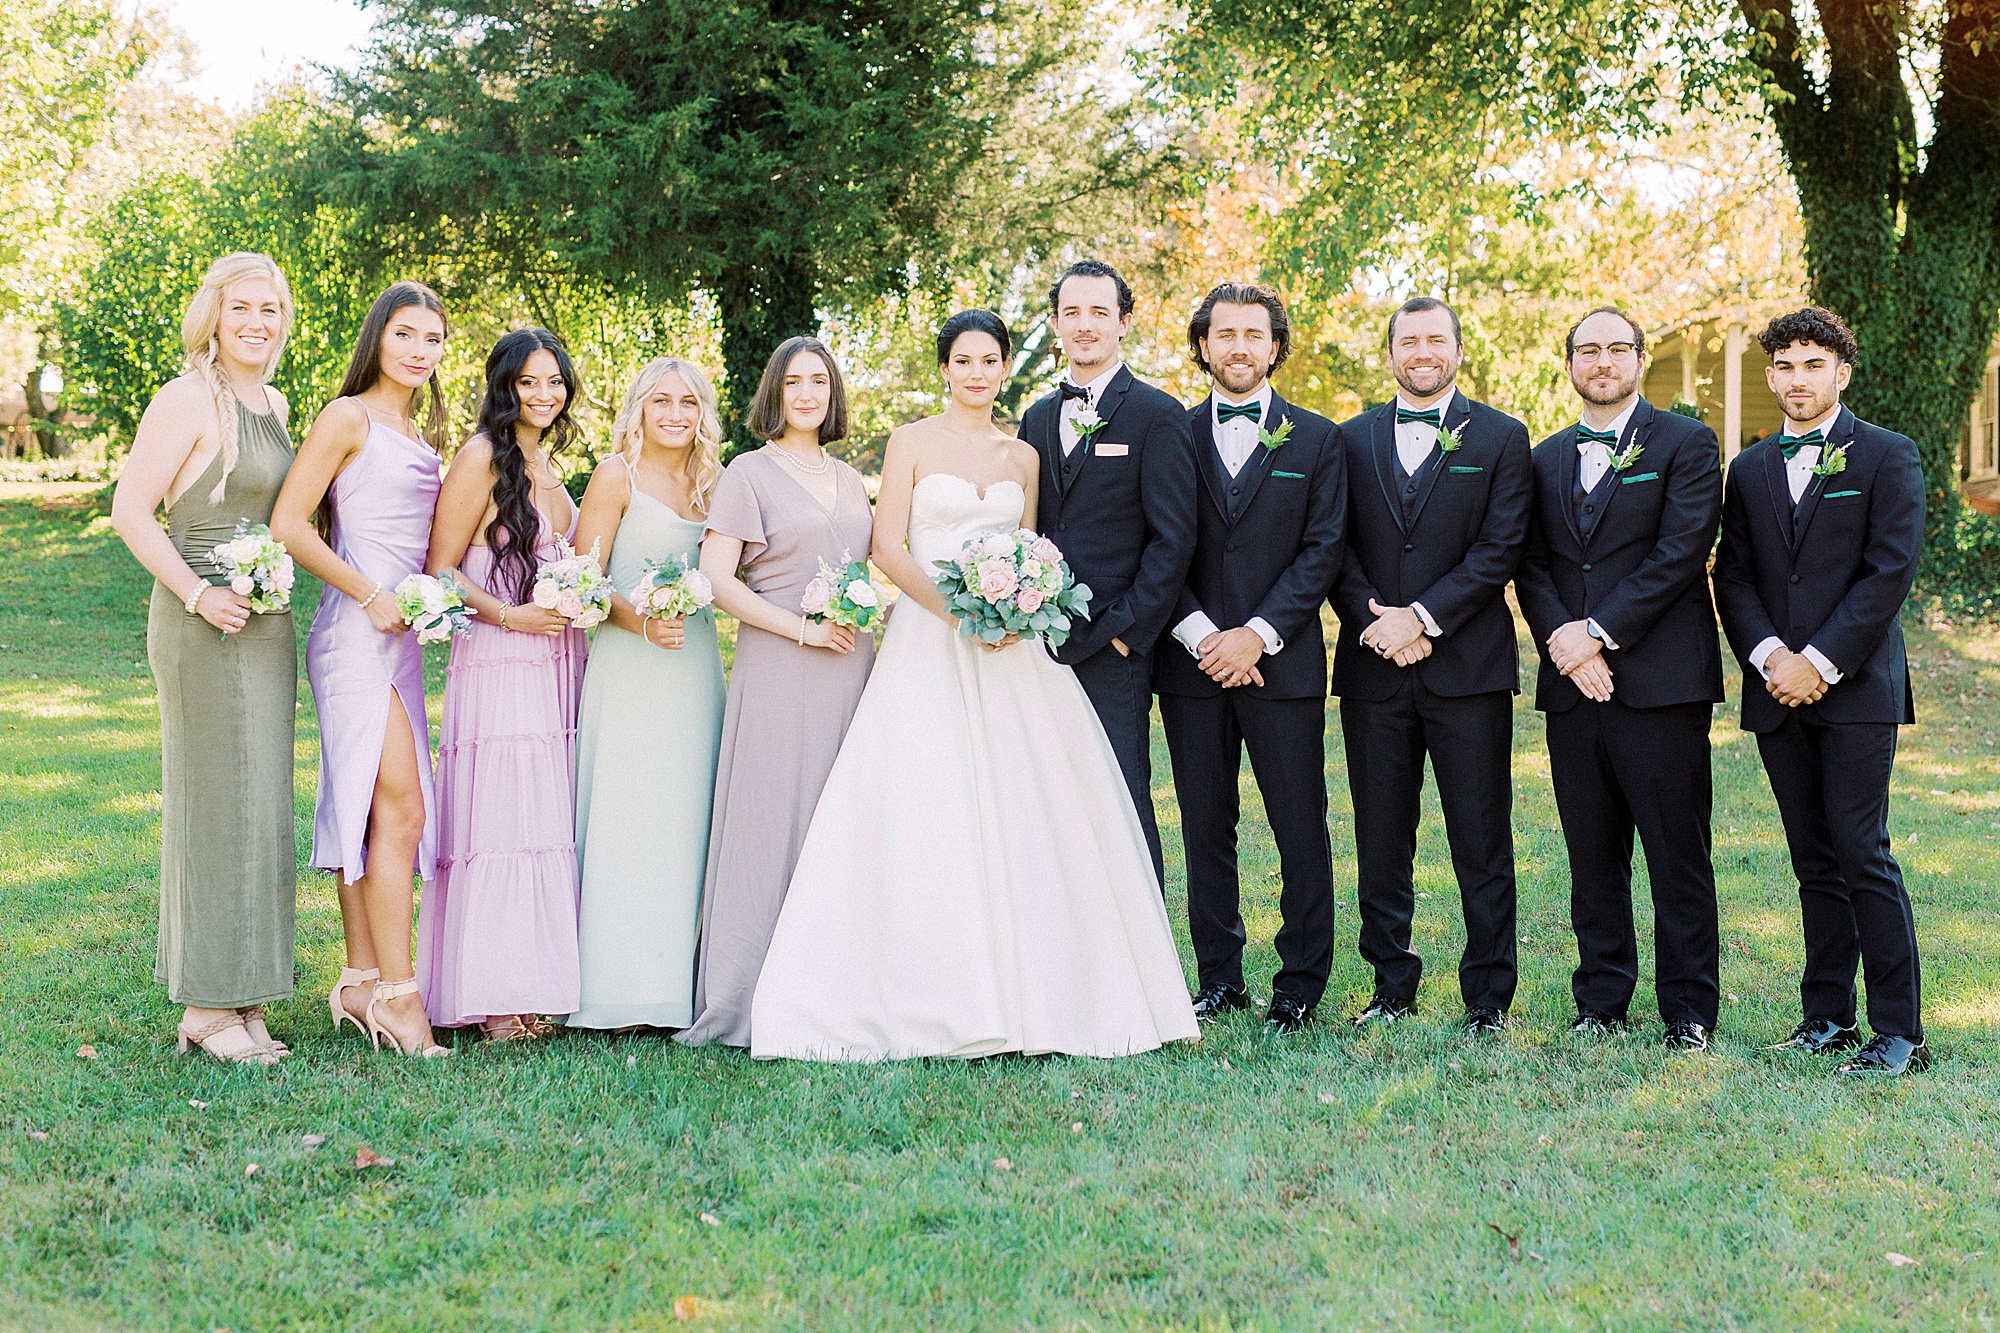 newlyweds stand with bridal party in classic tuxes